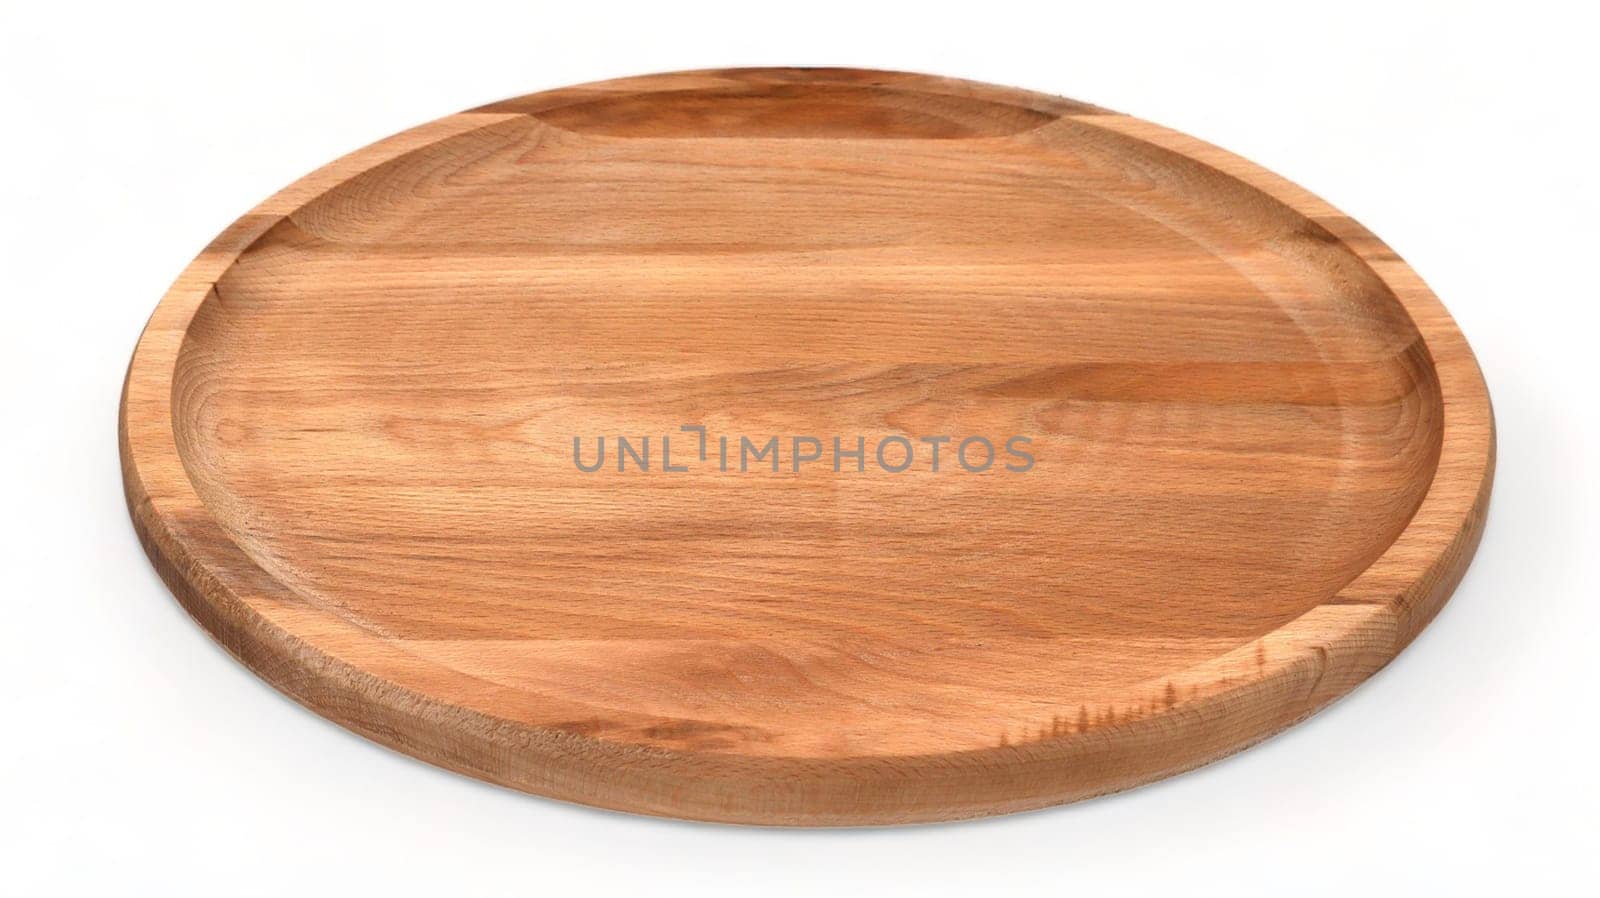 Top view and perspective of empty round wooden plate on white background. Space for branding, text or menu. Business food brand template. Layout. Cooking food. Culinary background